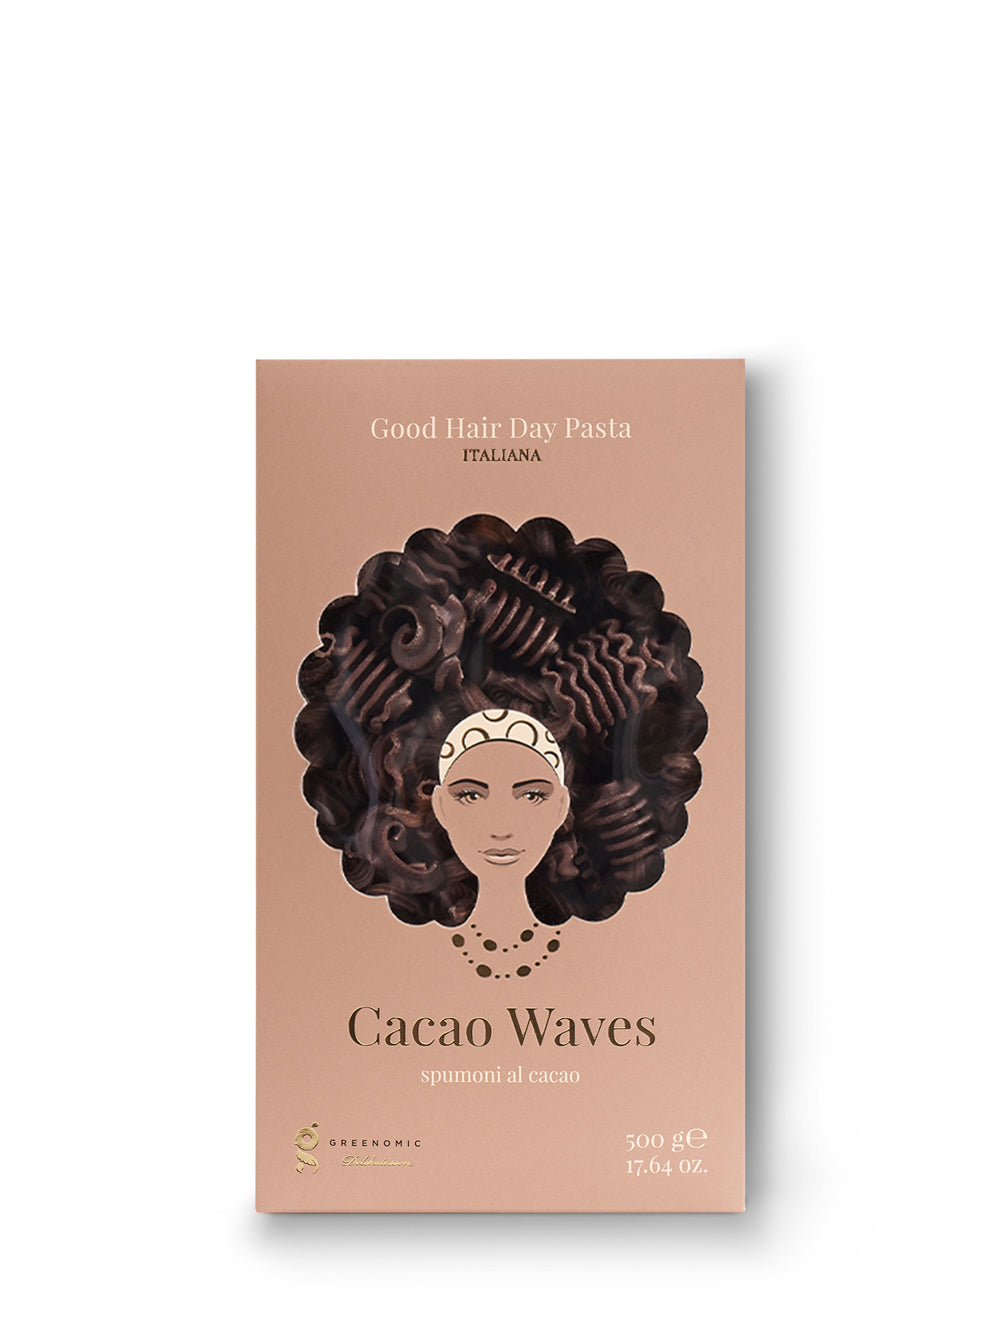 Good Hair Day Pasta Cacao Waves